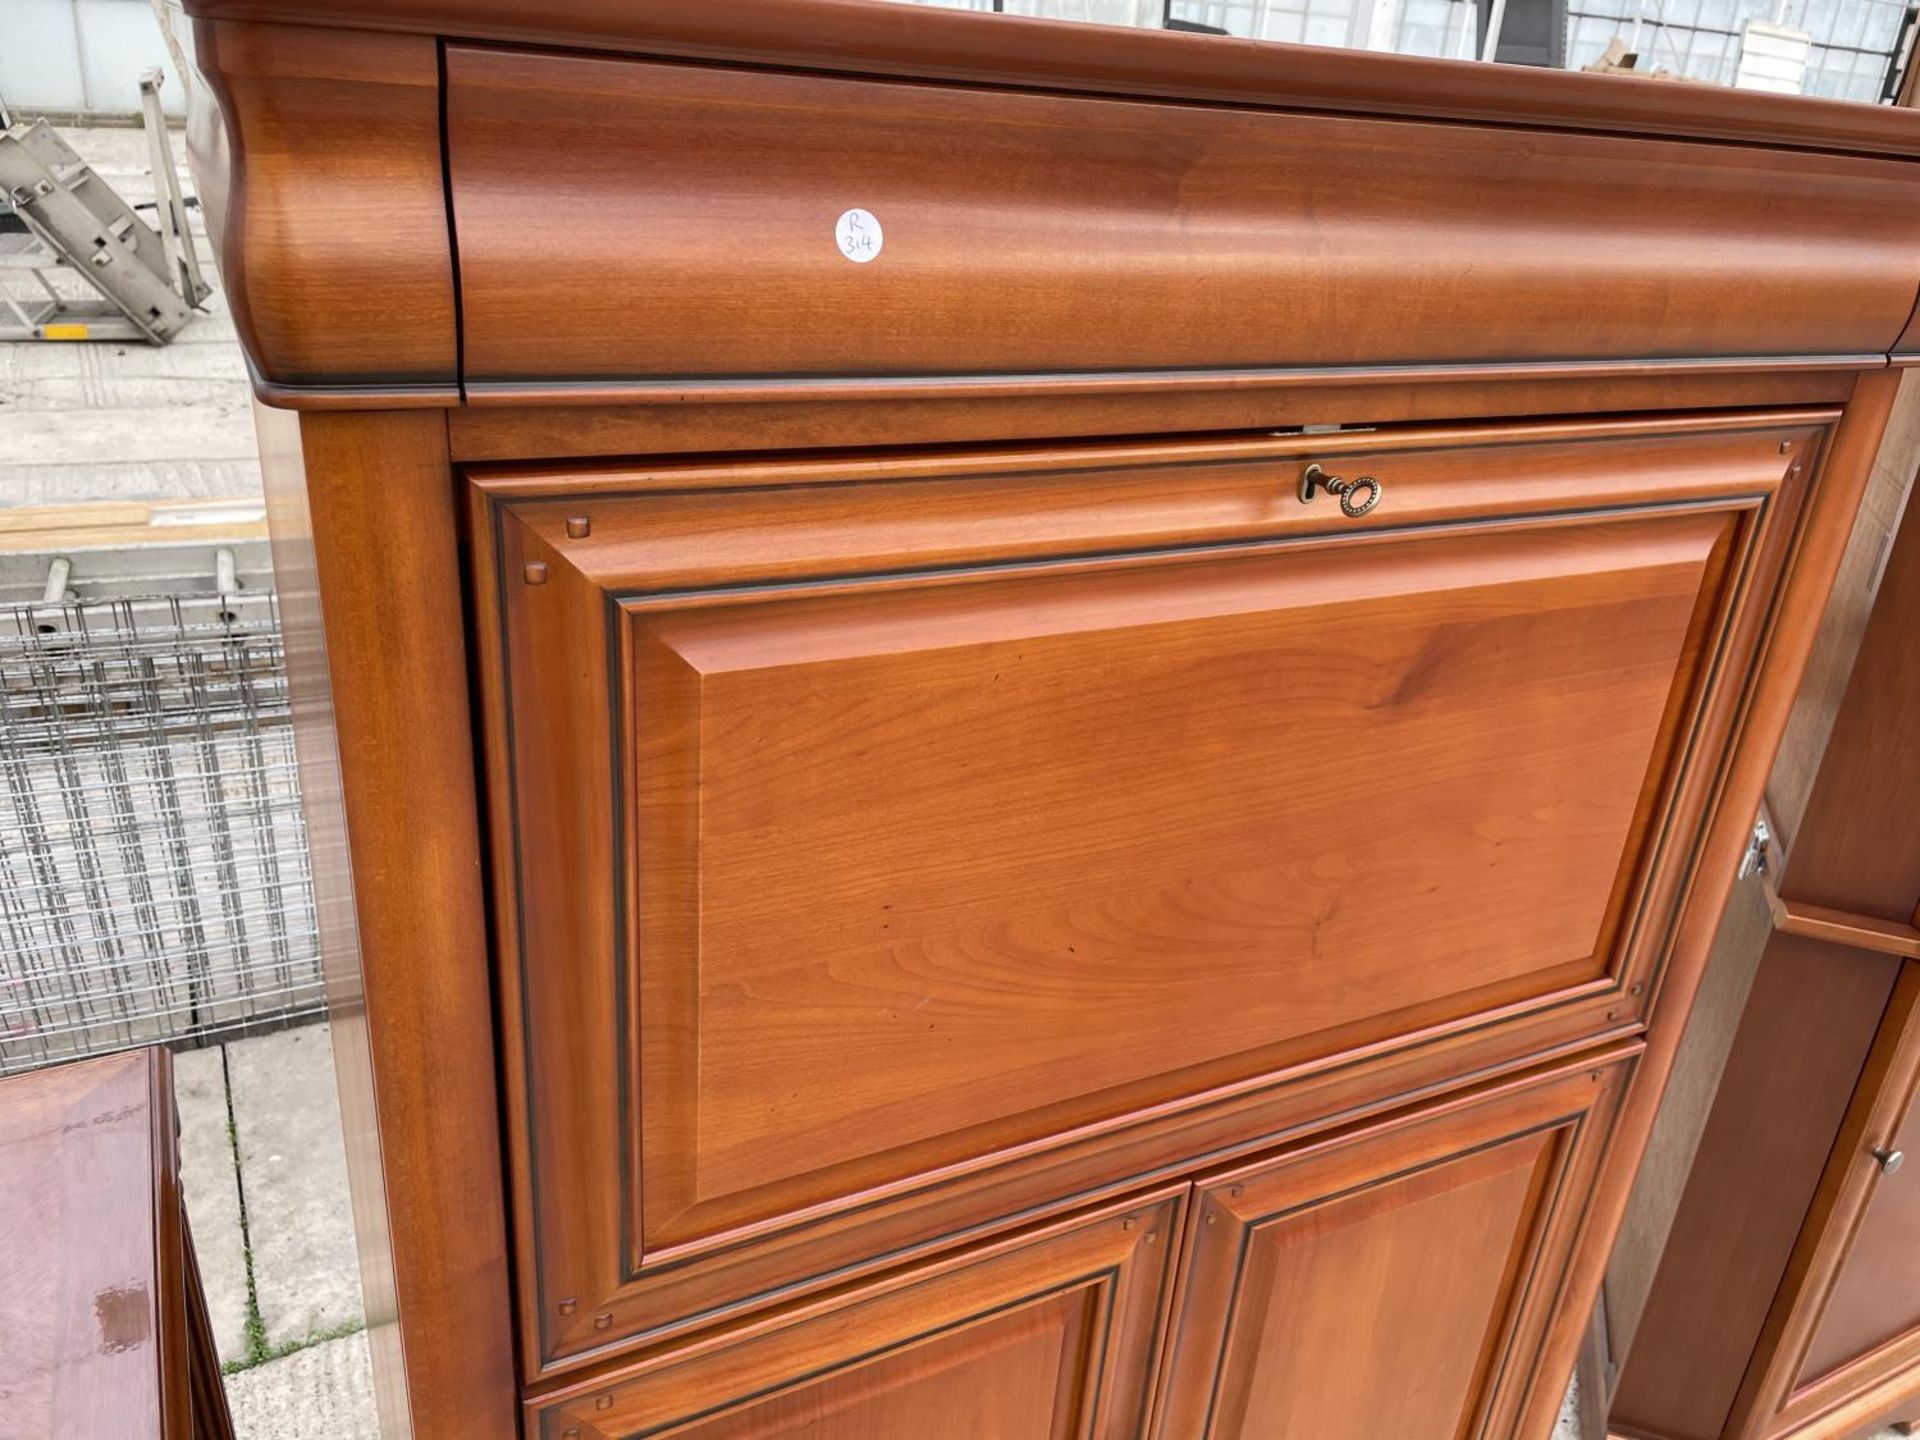 A CHERRY WOOD BUREAU CABINET WITH FALL FRONT, UPPER SECRET DRAWER AND TWO LOWER DOORS - Image 3 of 5